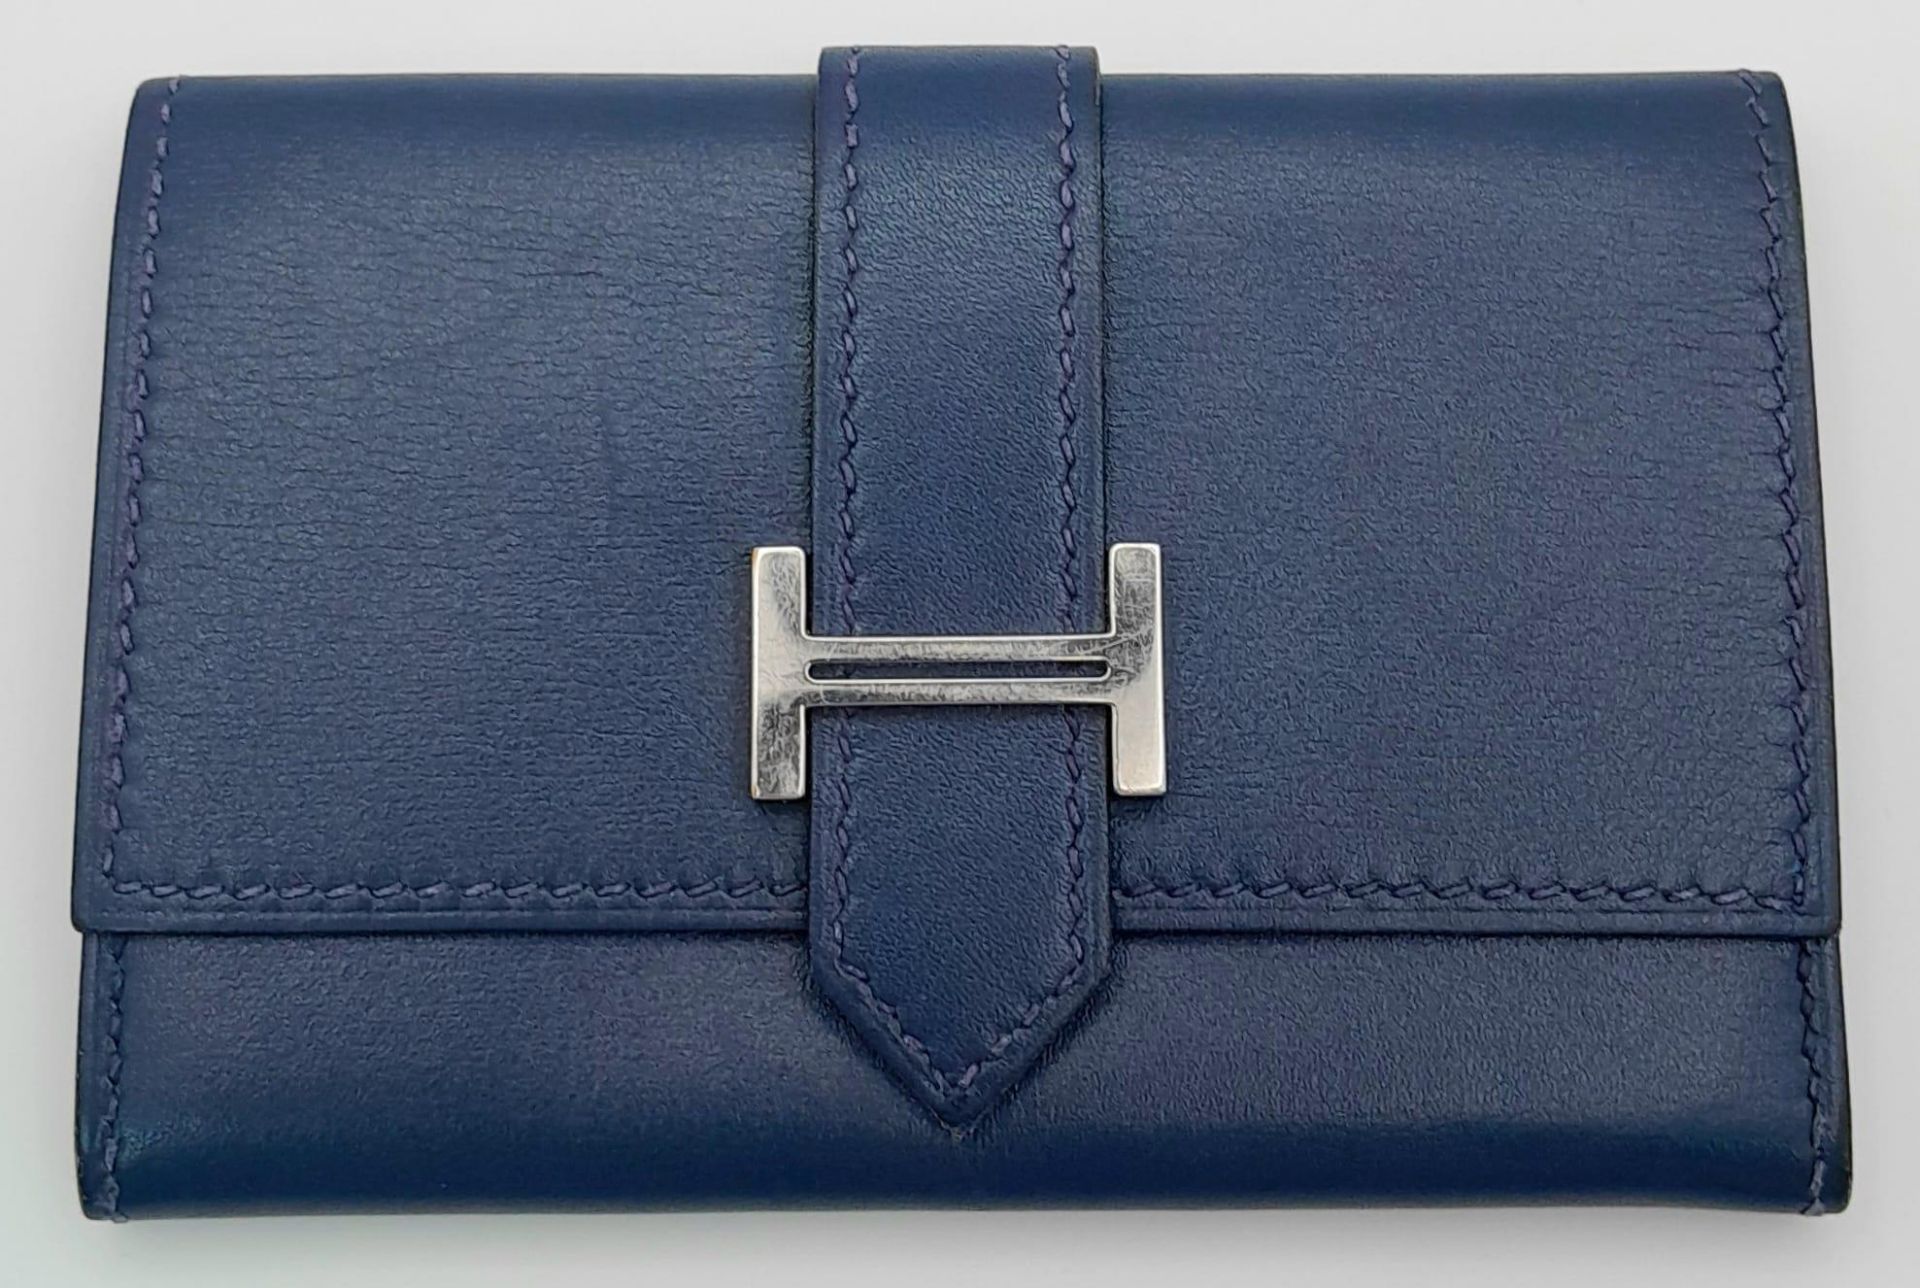 A Small Blue Leather Hermes Ladies Wallet. Flap design with Letter H branding. In good condition but